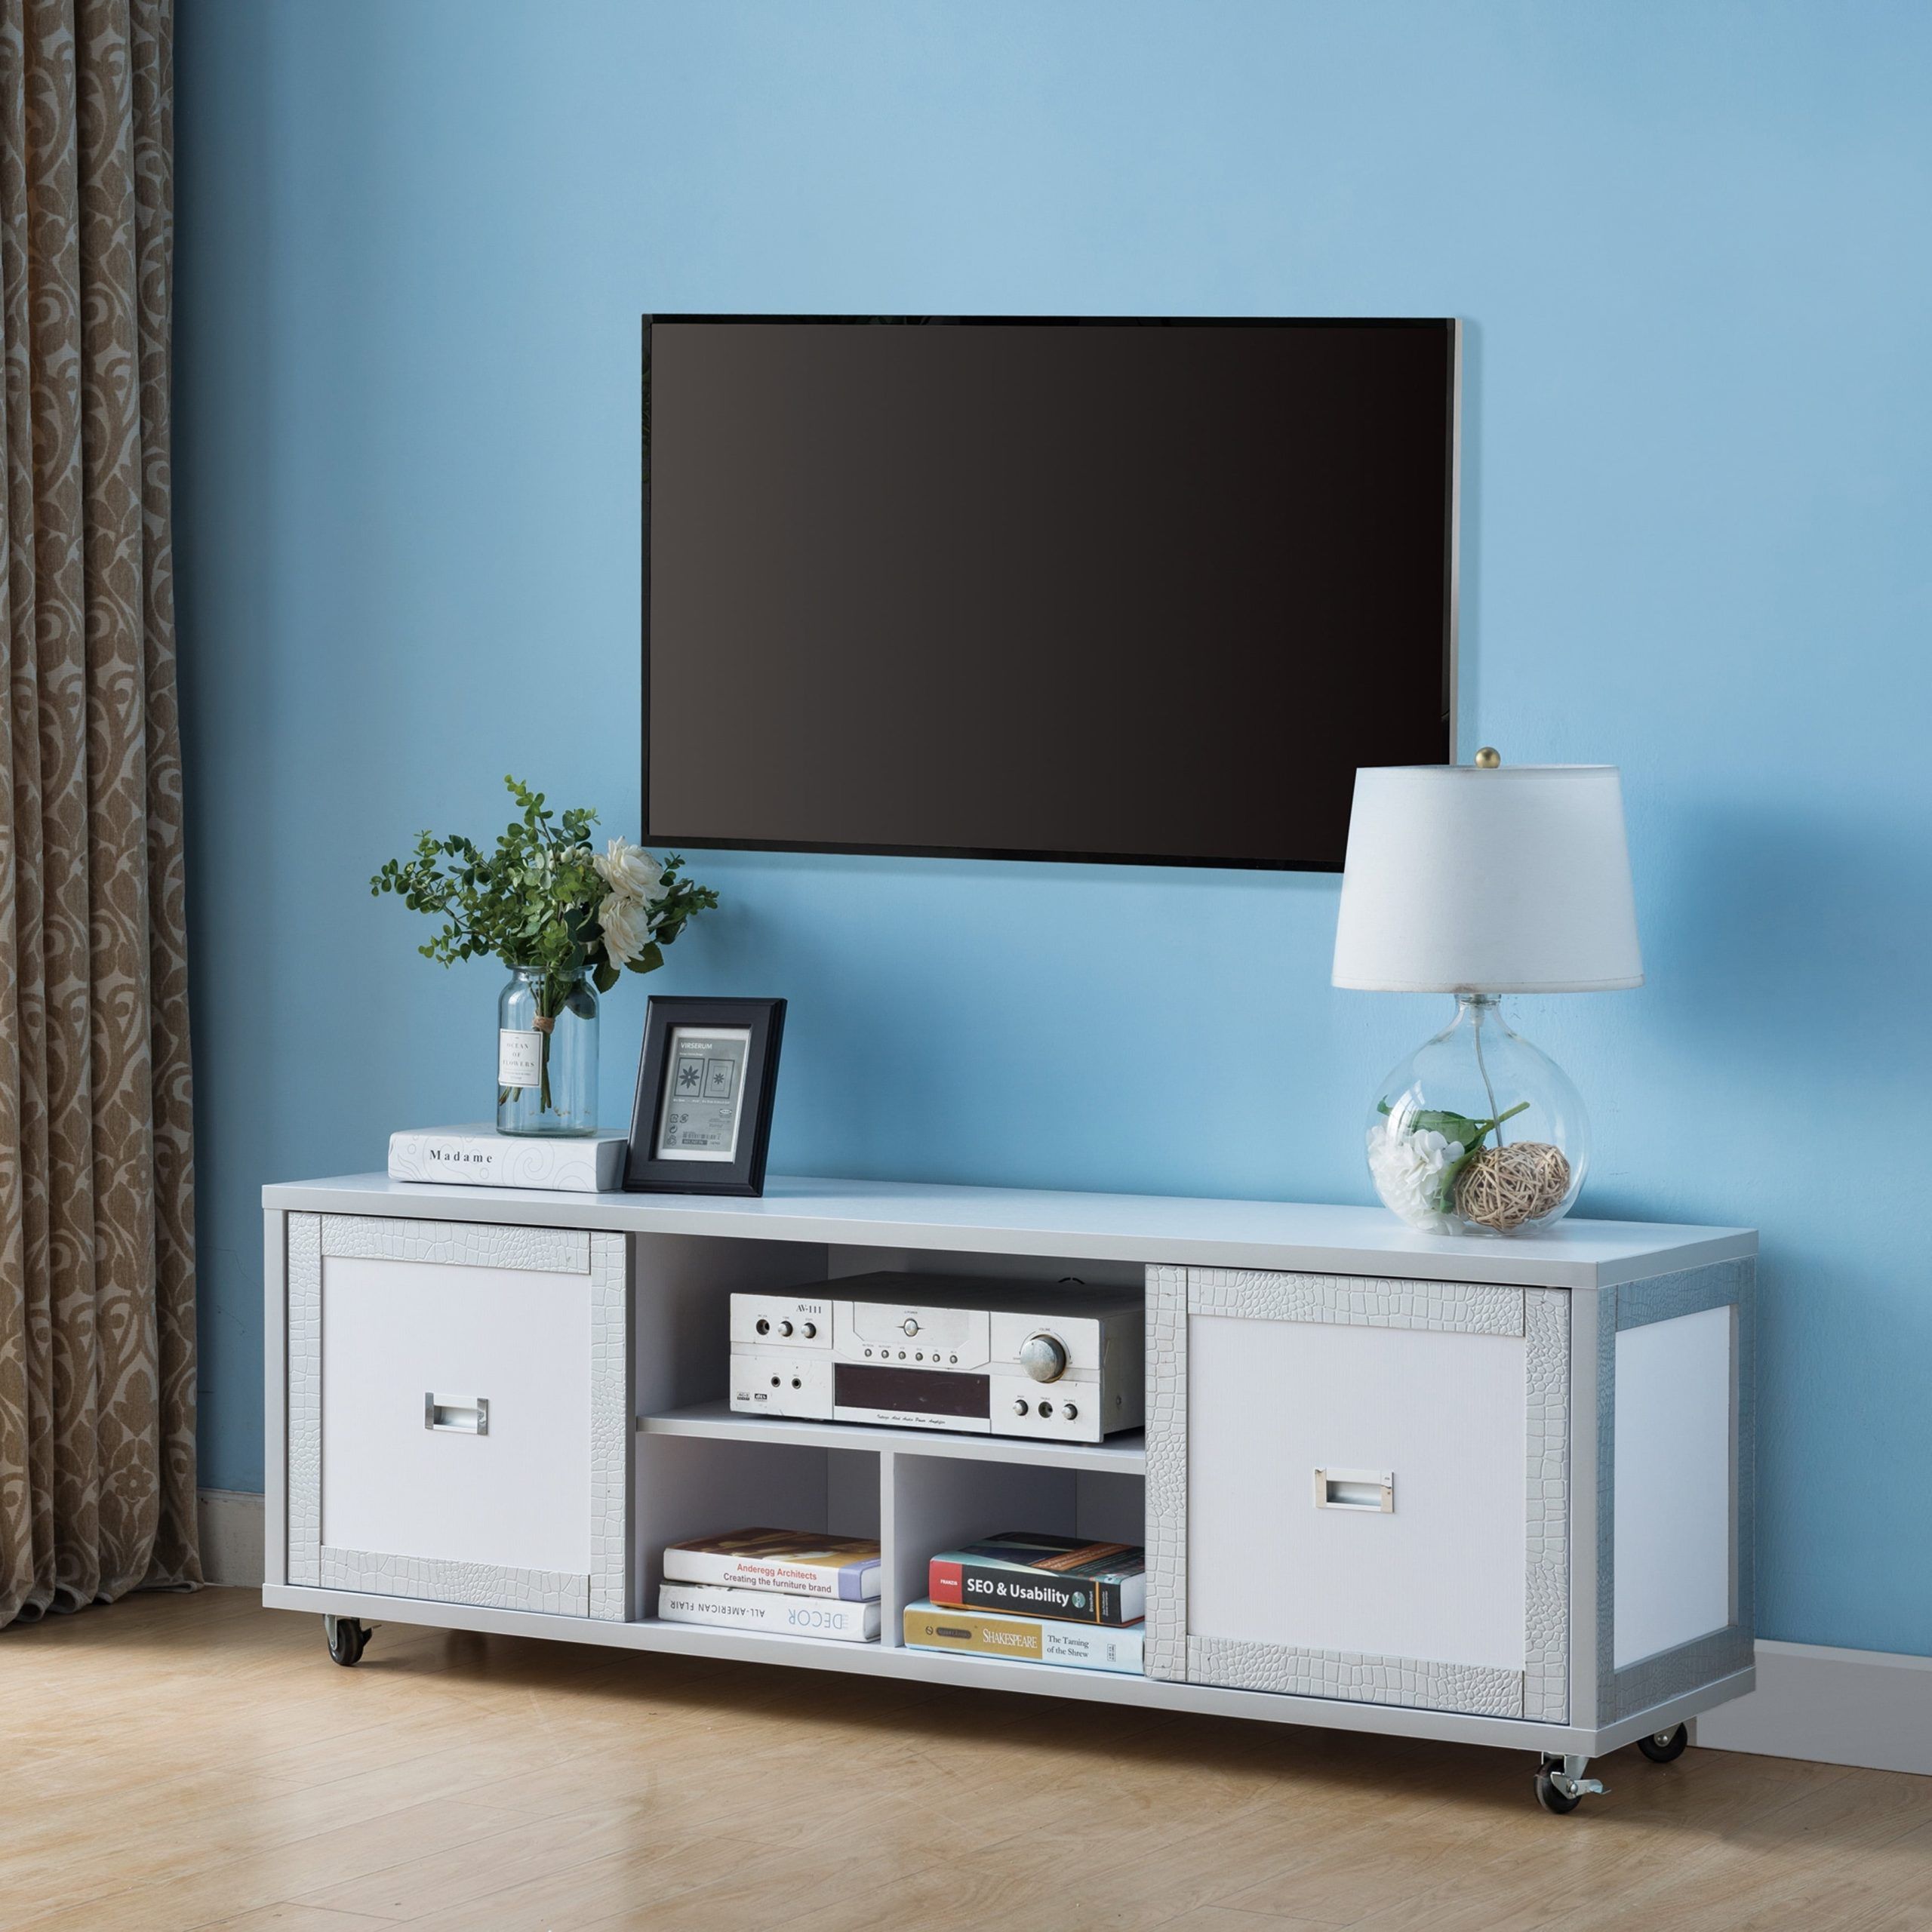 Furniture Of America Gaur Contemporary 60 Inch White 3 Shelf Tv Stand Throughout Modern Stands With Shelves (View 8 of 20)